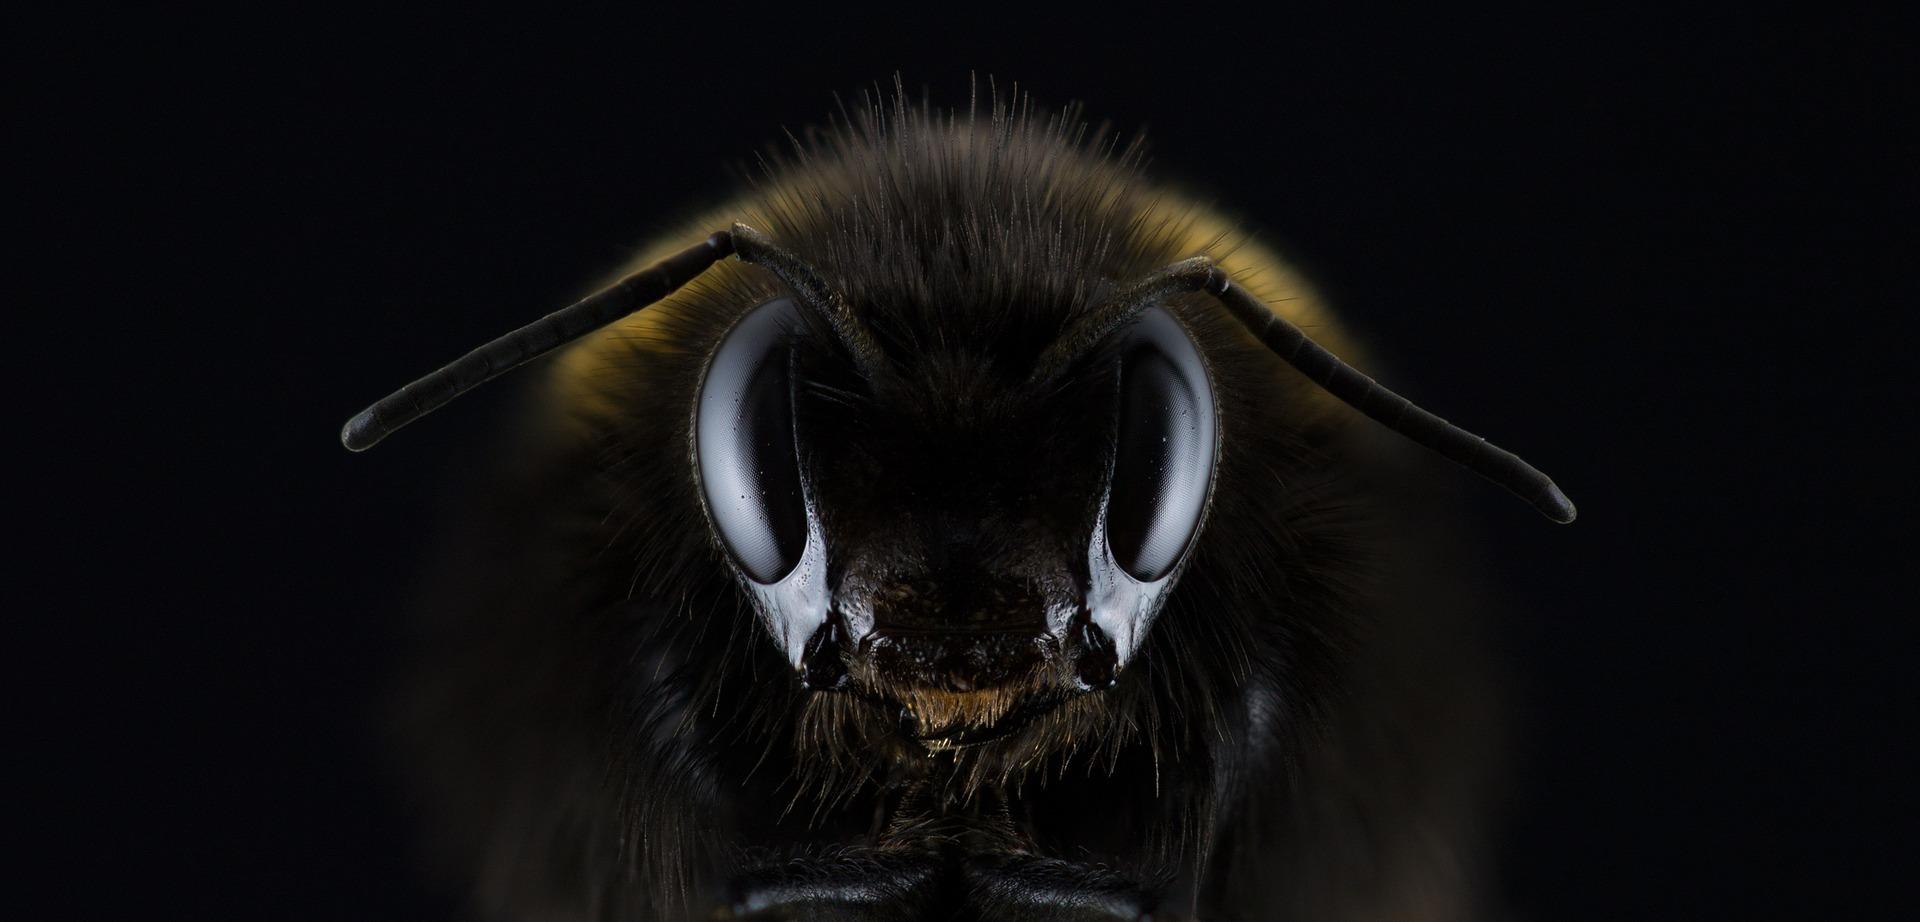 Dark image displaying a bee's frontal body/